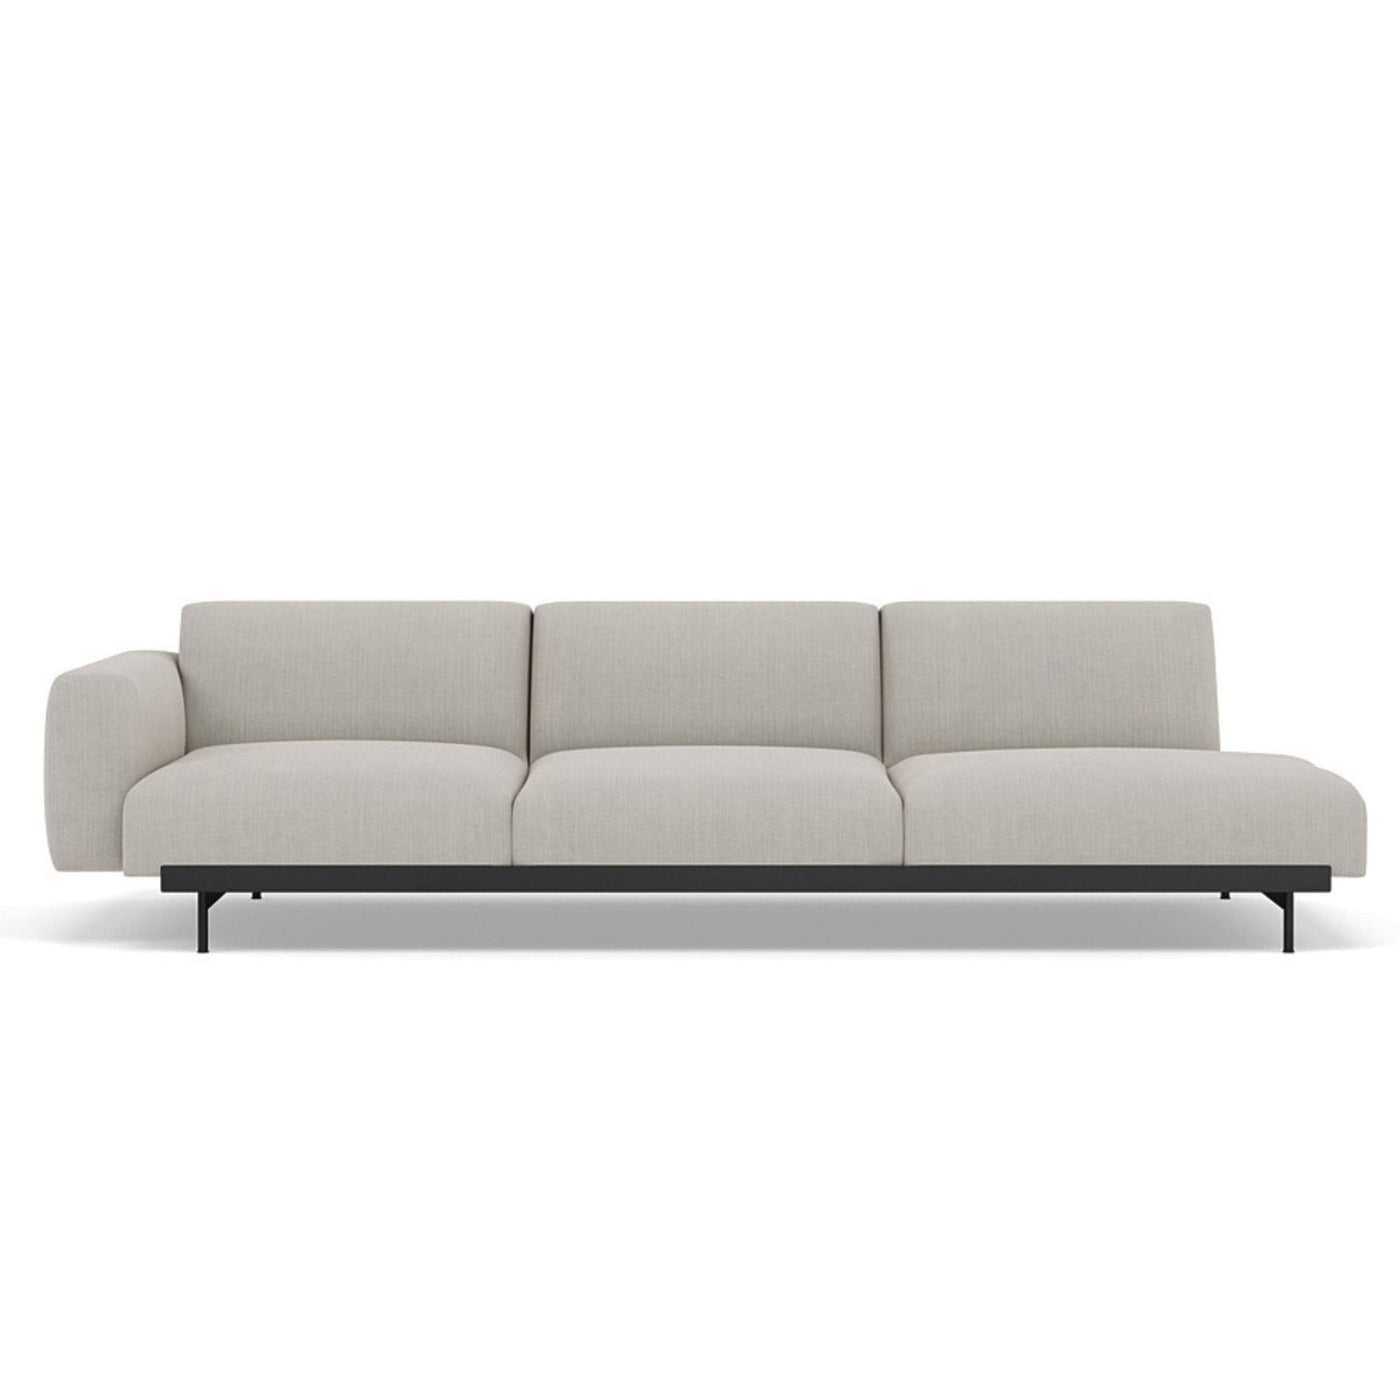 Muuto In Situ Modular 3 Seater Sofa, configuration 3. Made to order from someday designs. #colour_fiord-201